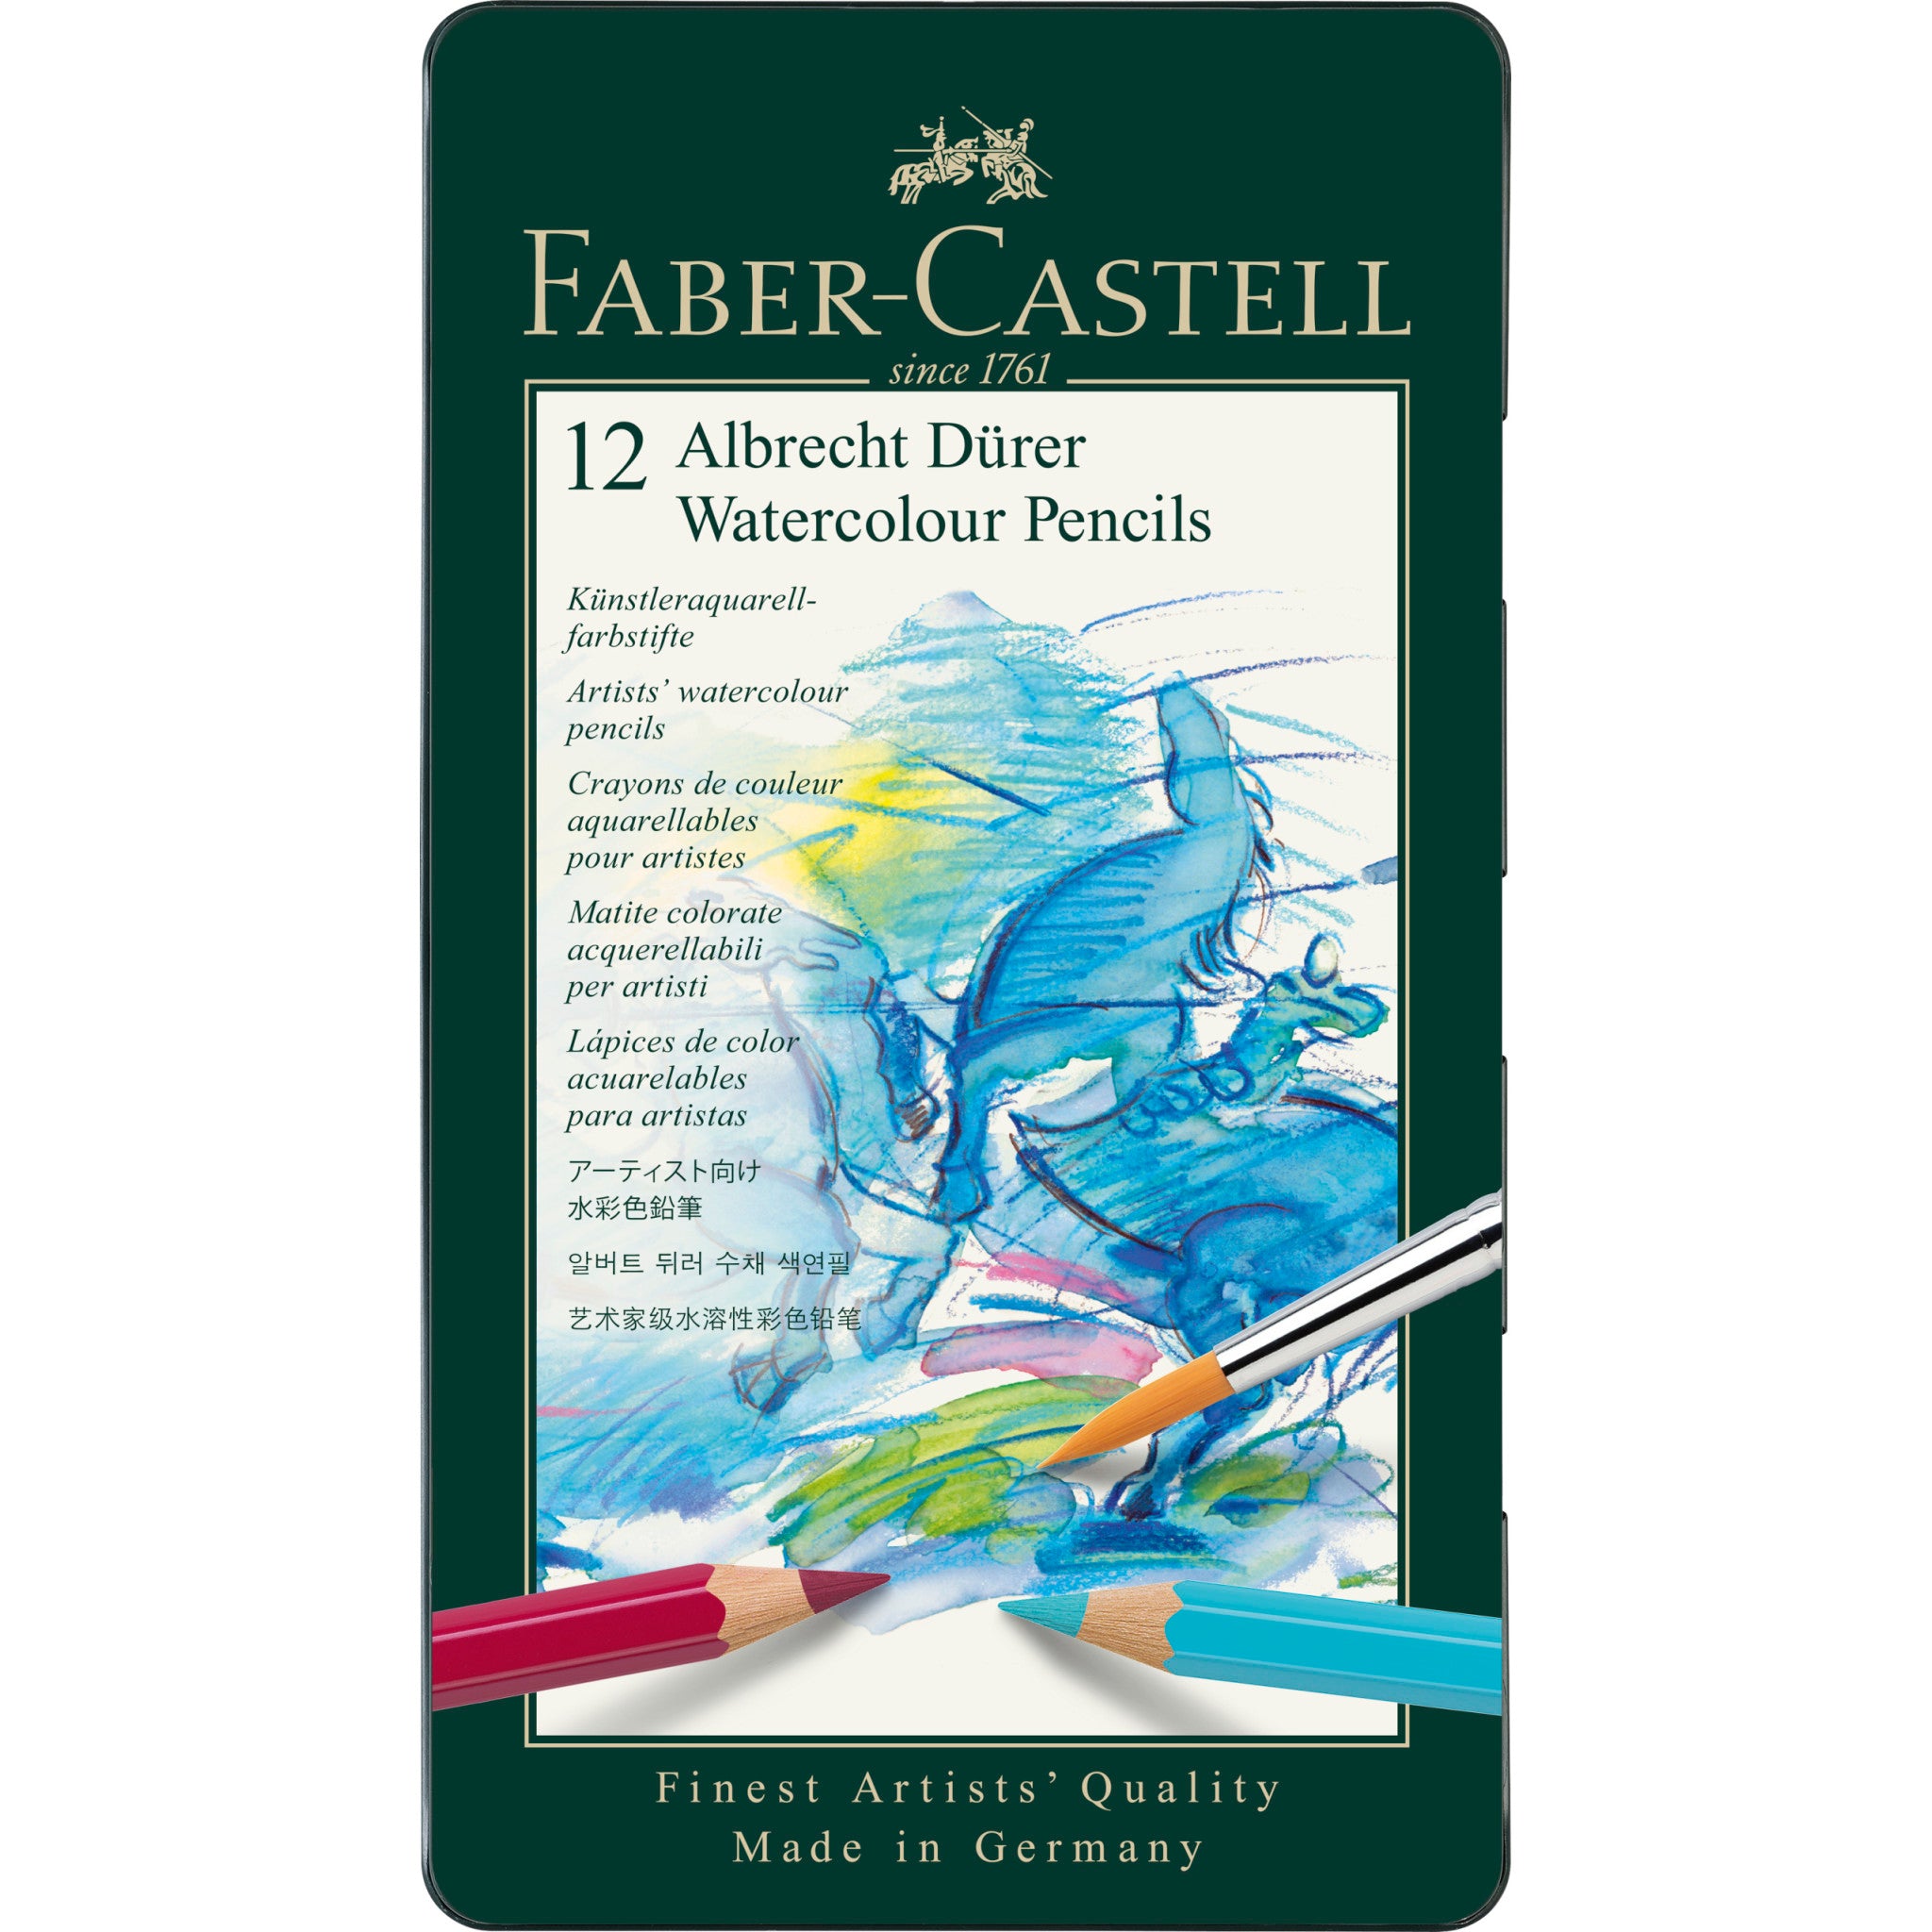  Castle Art Supplies 120 Watercolor Pencils Set with Extras, Quality Vibrant Pigments, Draw and Paint at the Same Time, For Adult  Hobbyists, Professionals